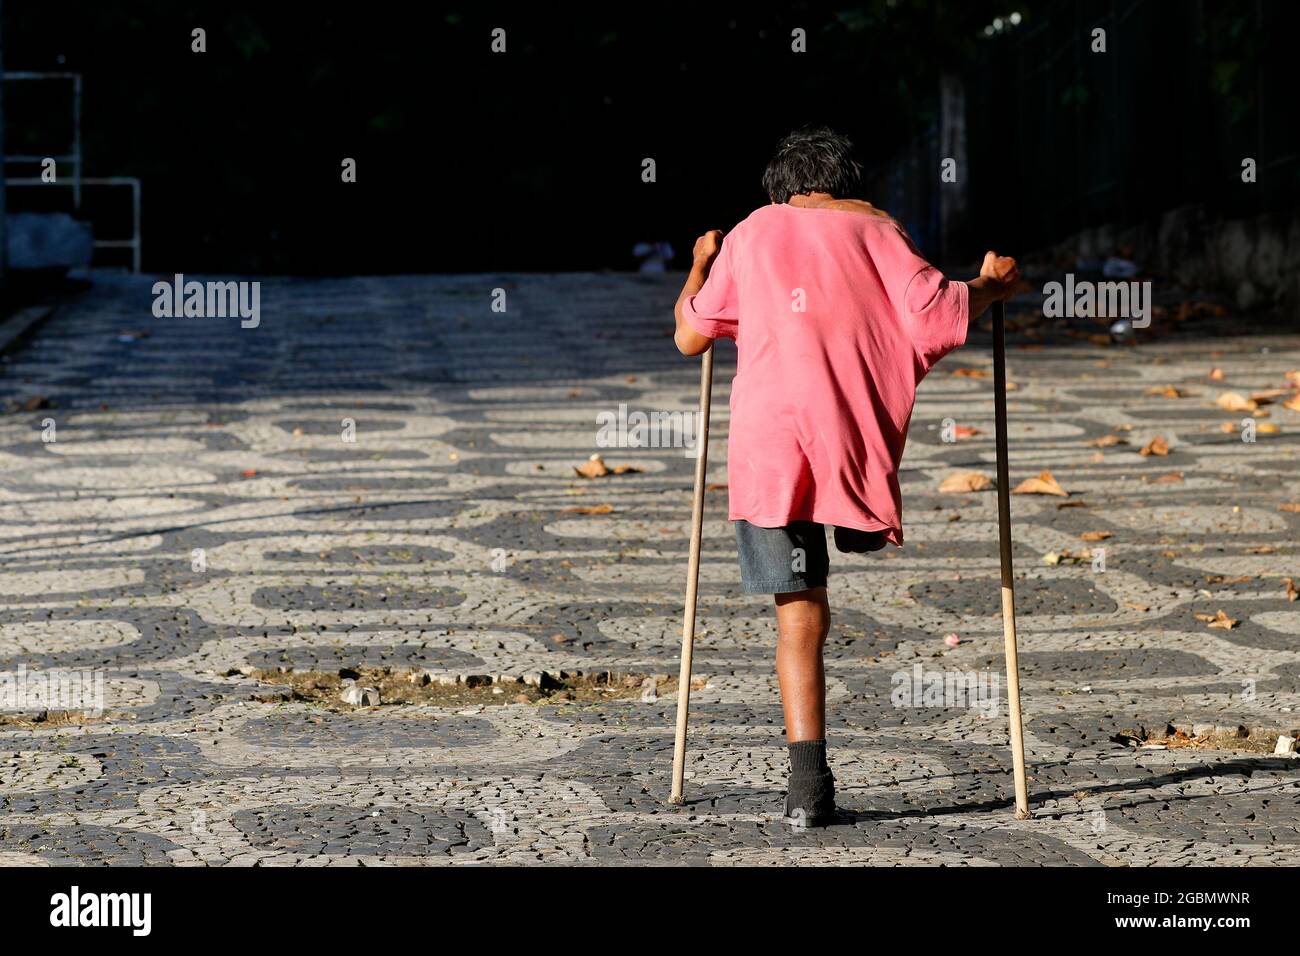 Disabled one-legged handicapped homeless man walking on crutches. Stock Photo